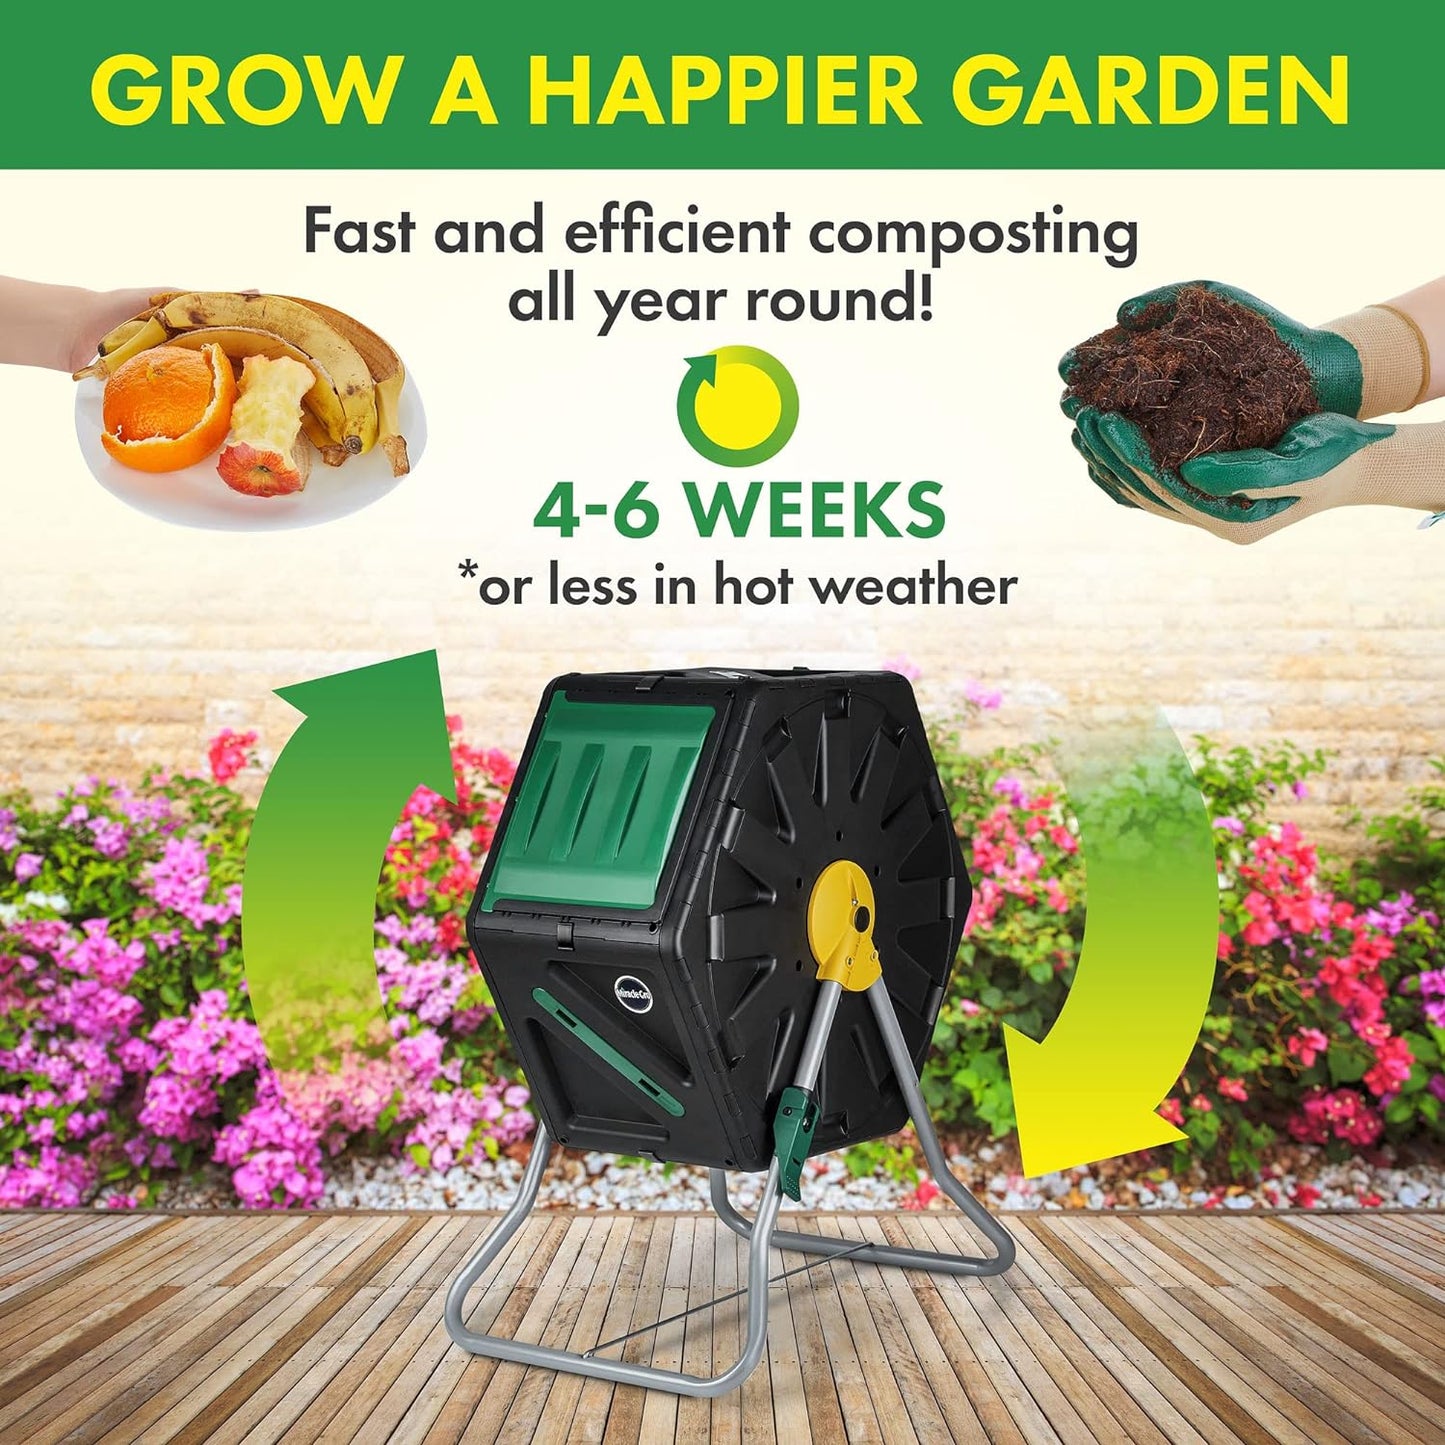 Miracle-Gro Small Composter - Compact Single Chamber Outdoor Garden Compost Bin Heavy Duty \u2013 UV Protected Turning Barrel Tumbling Composter (18.5 gallons)